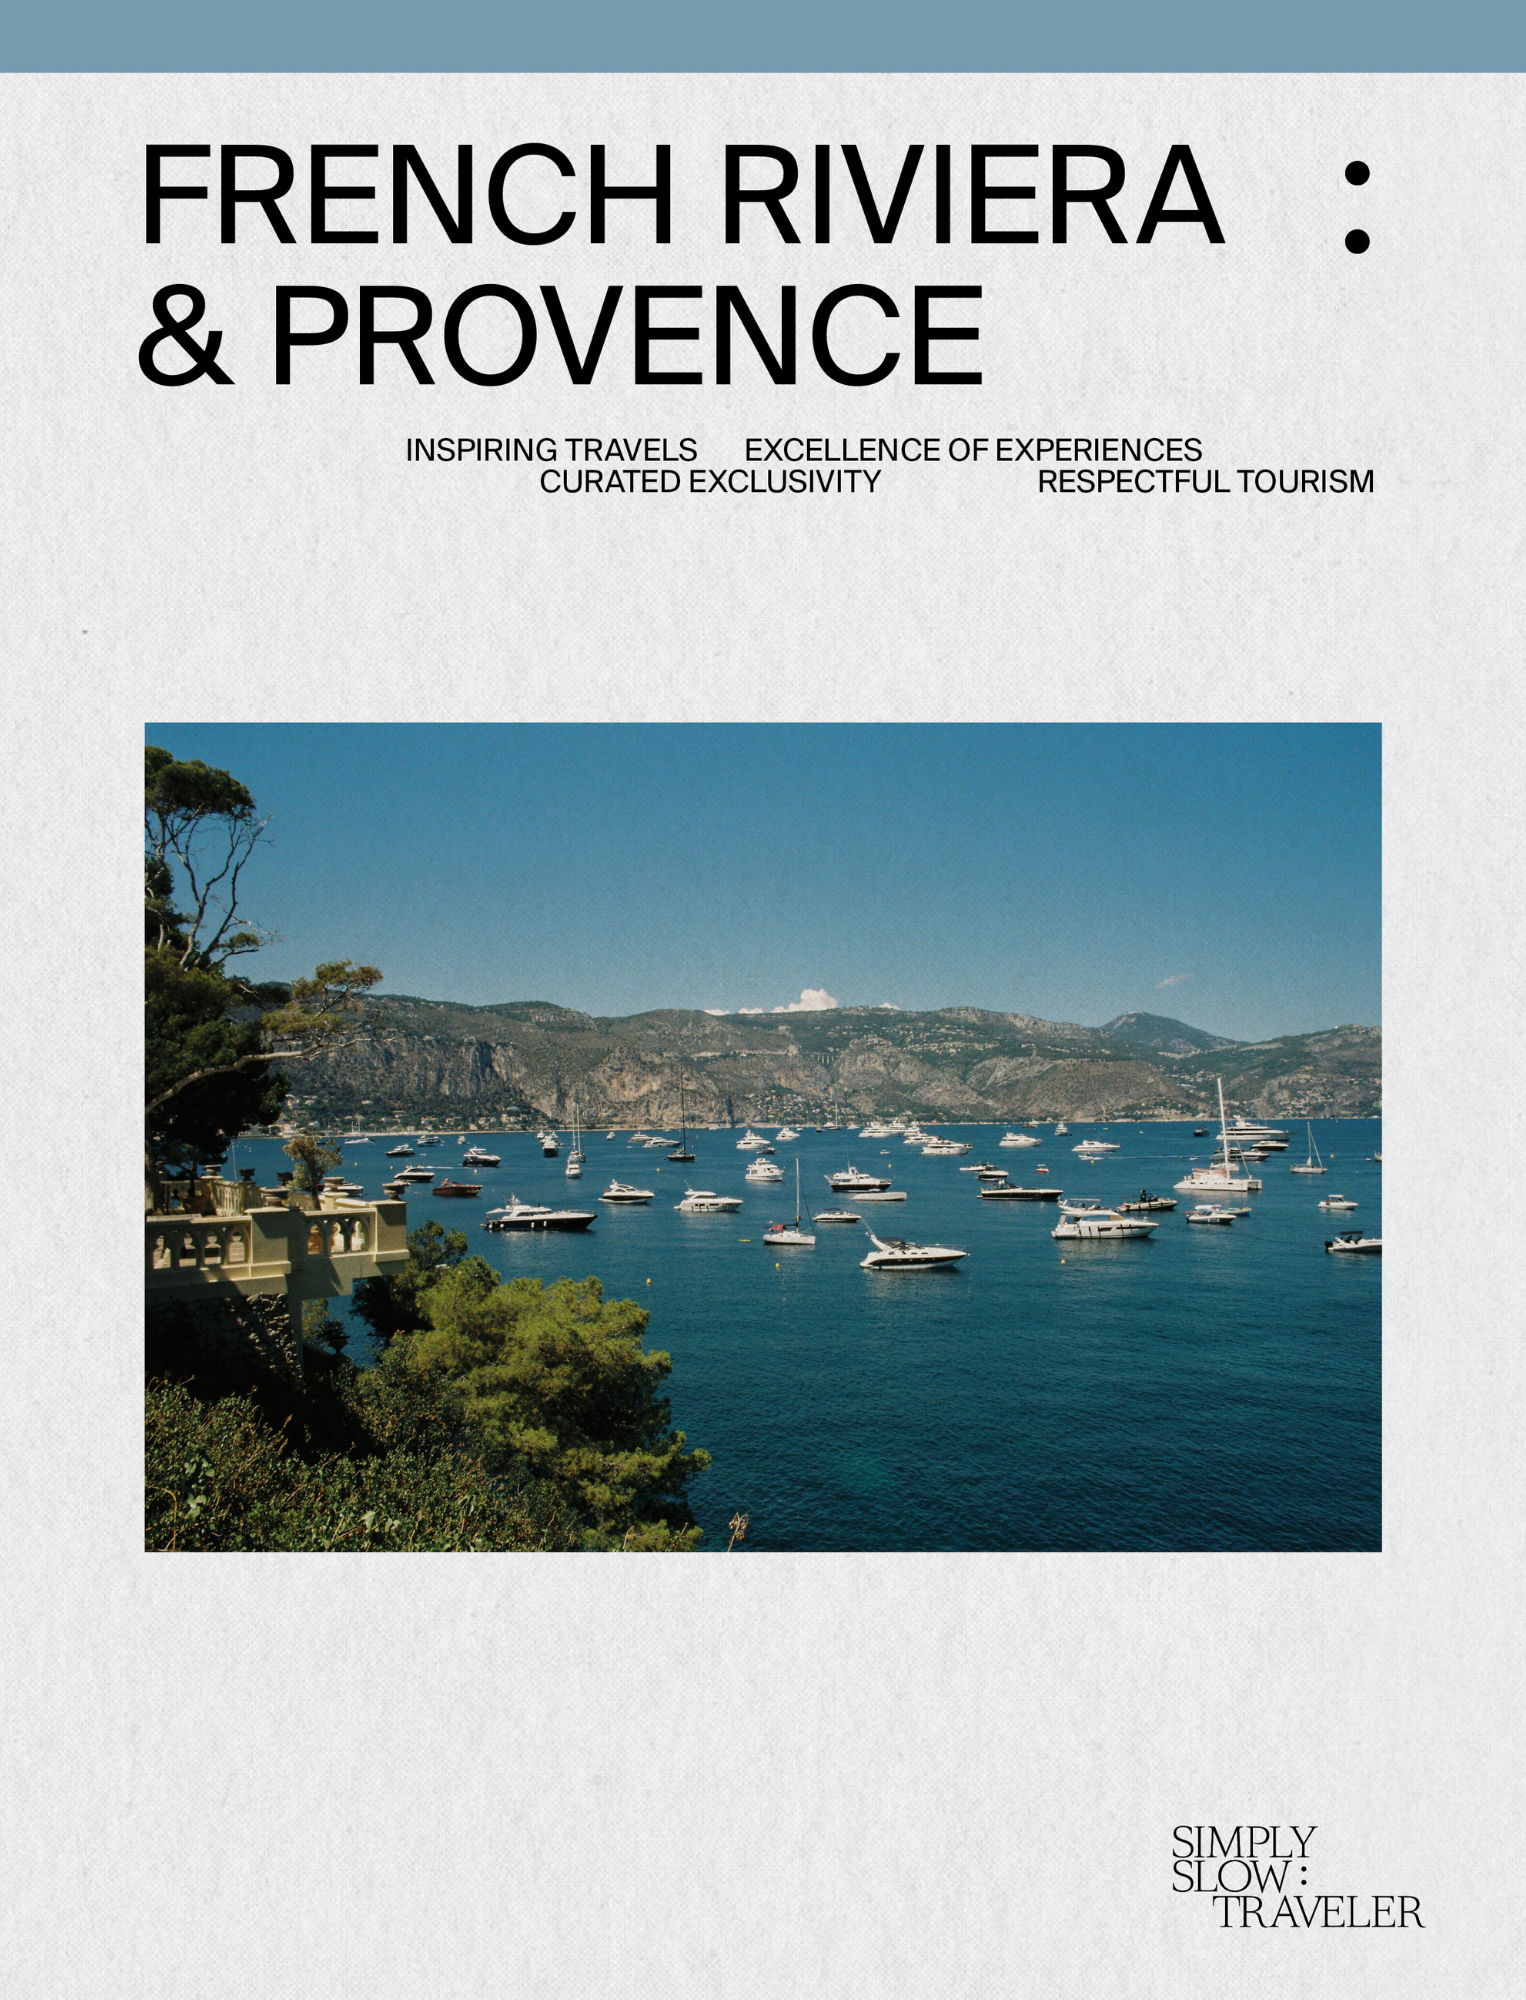 A Guide to the French Riviera & Provence - the cover page, by Simply Slow Traveler